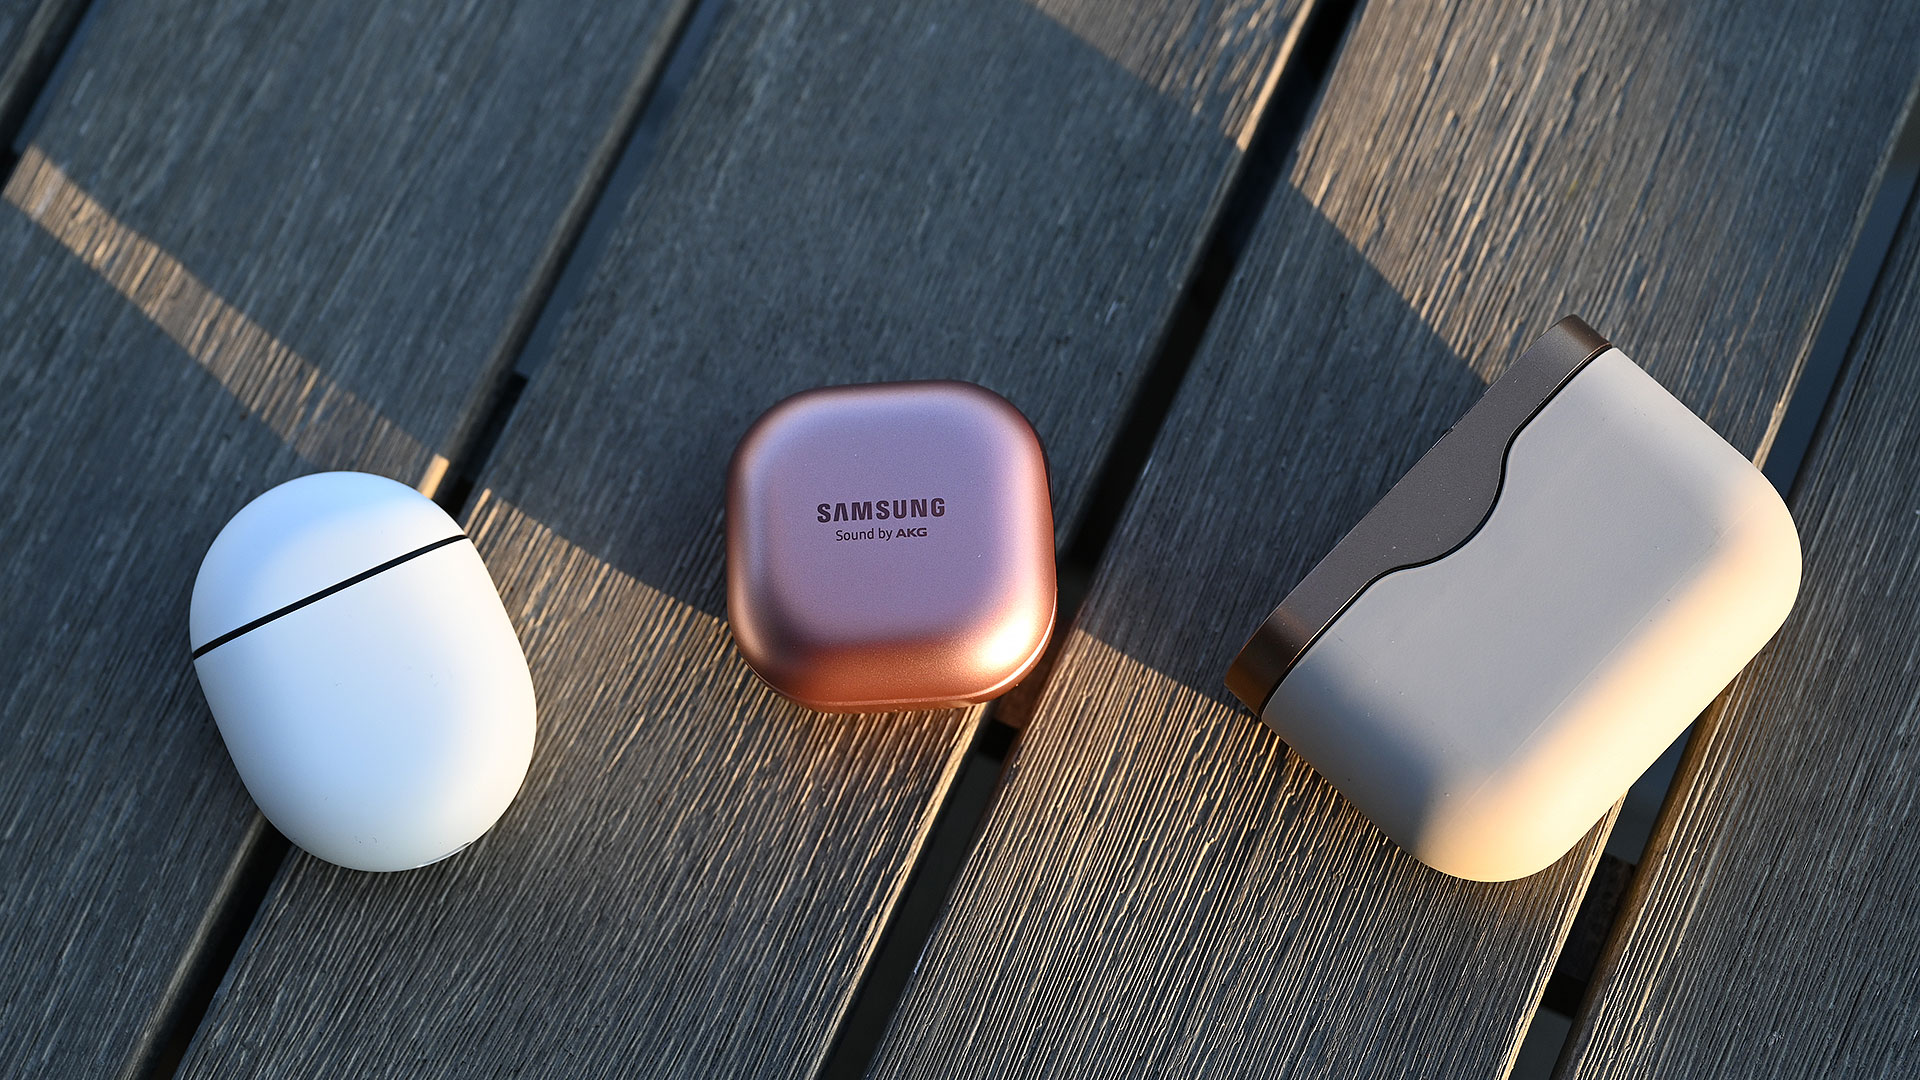 The Galaxy Buds Live case is also quite compact, as it's smaller (though slightly thicker) than Google's Pixel Buds case, and almost half the size of Sony's WF-1000XM3 case.  (Photo: Sam Rutherford)